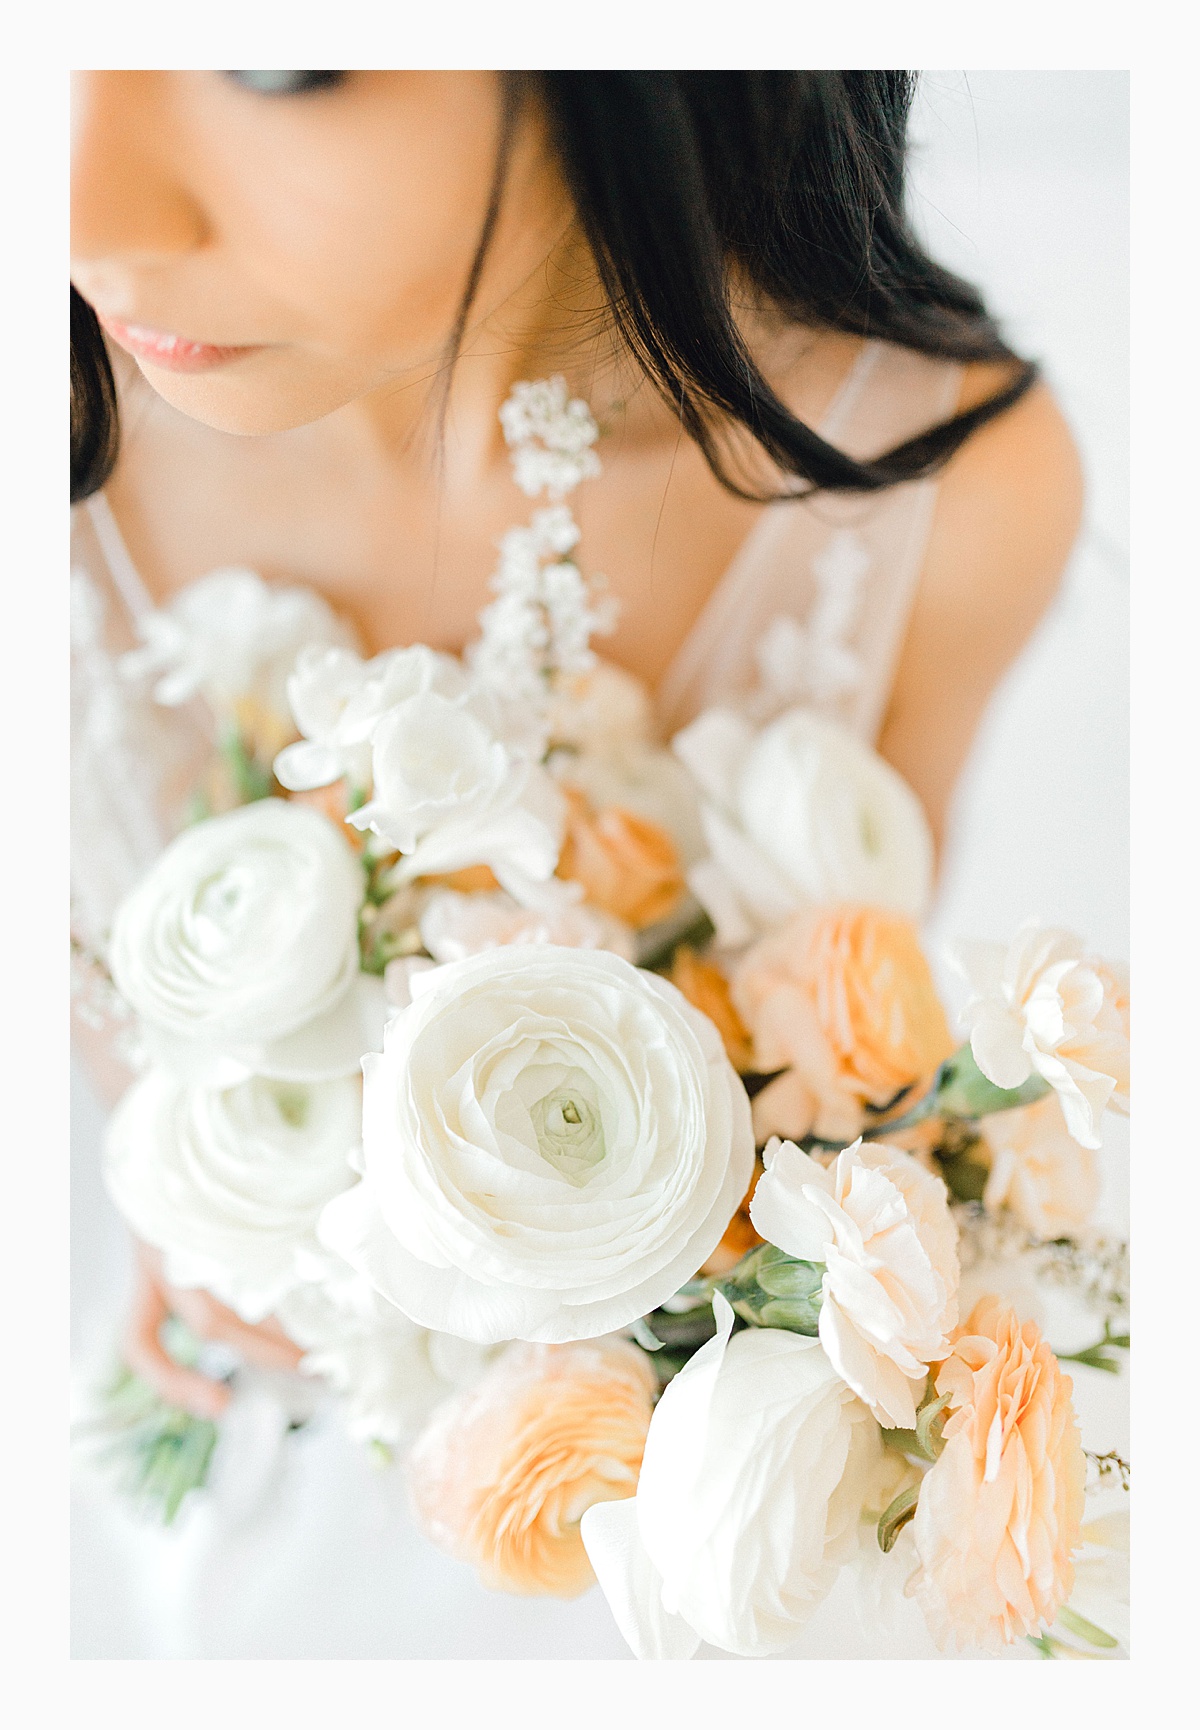 The Bemis Building in downtown Seattle is one of my favorite places to use for photo shoots!  This styled bridal shoot with touches of peach and white was dreamy.  #emmarosecompany #kindredpresets #seattlebride_0021.jpg